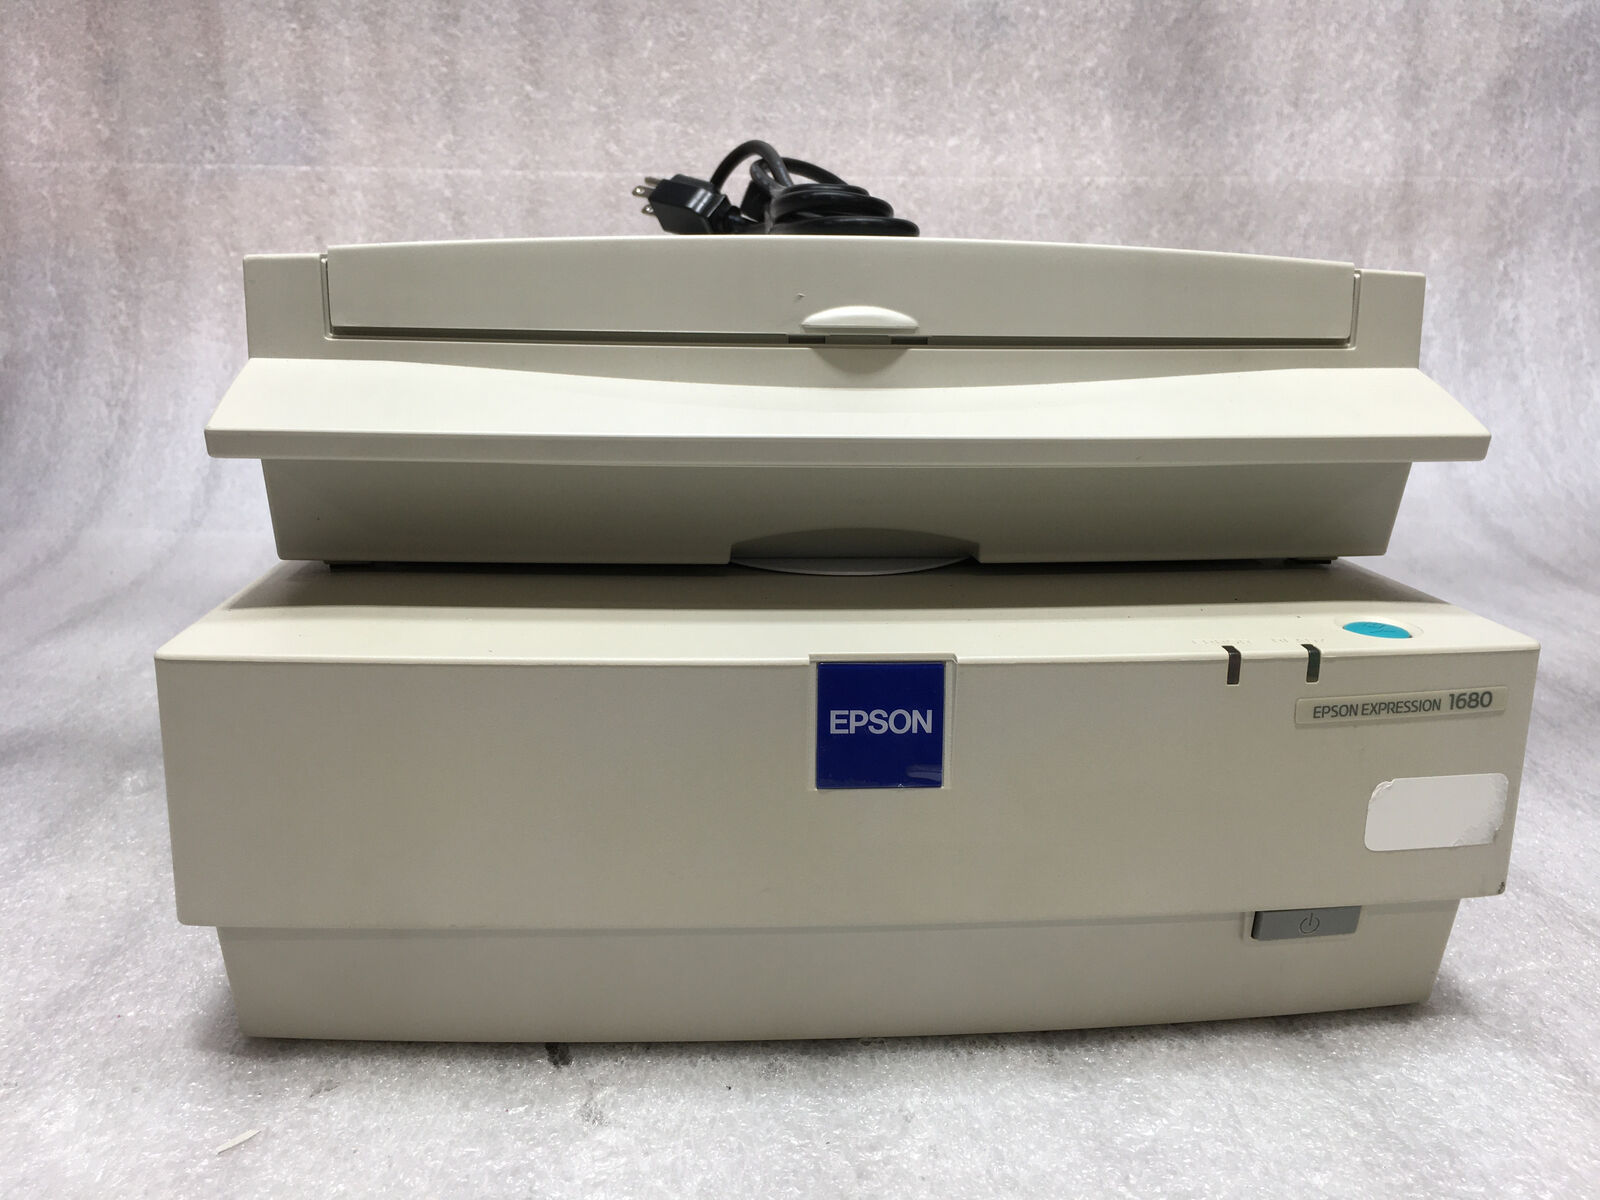 Epson Expression 1600 EU-35 Flatbed Scanner Used Transparency, Fair Condition,